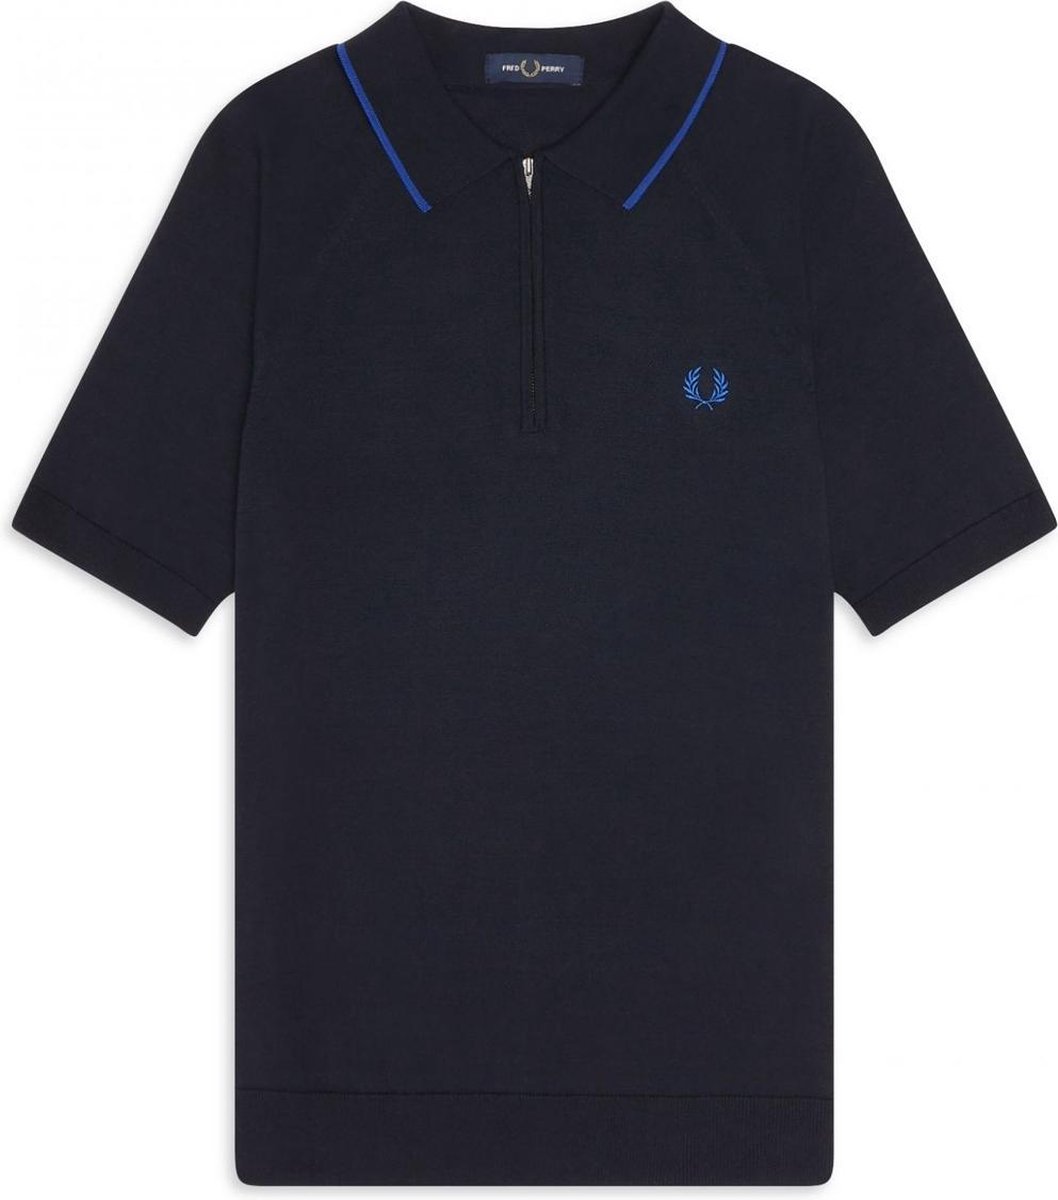 Fred Perry - Zip Neck Knitted Shirt - Polo met Ritssluiting - S - Blauw